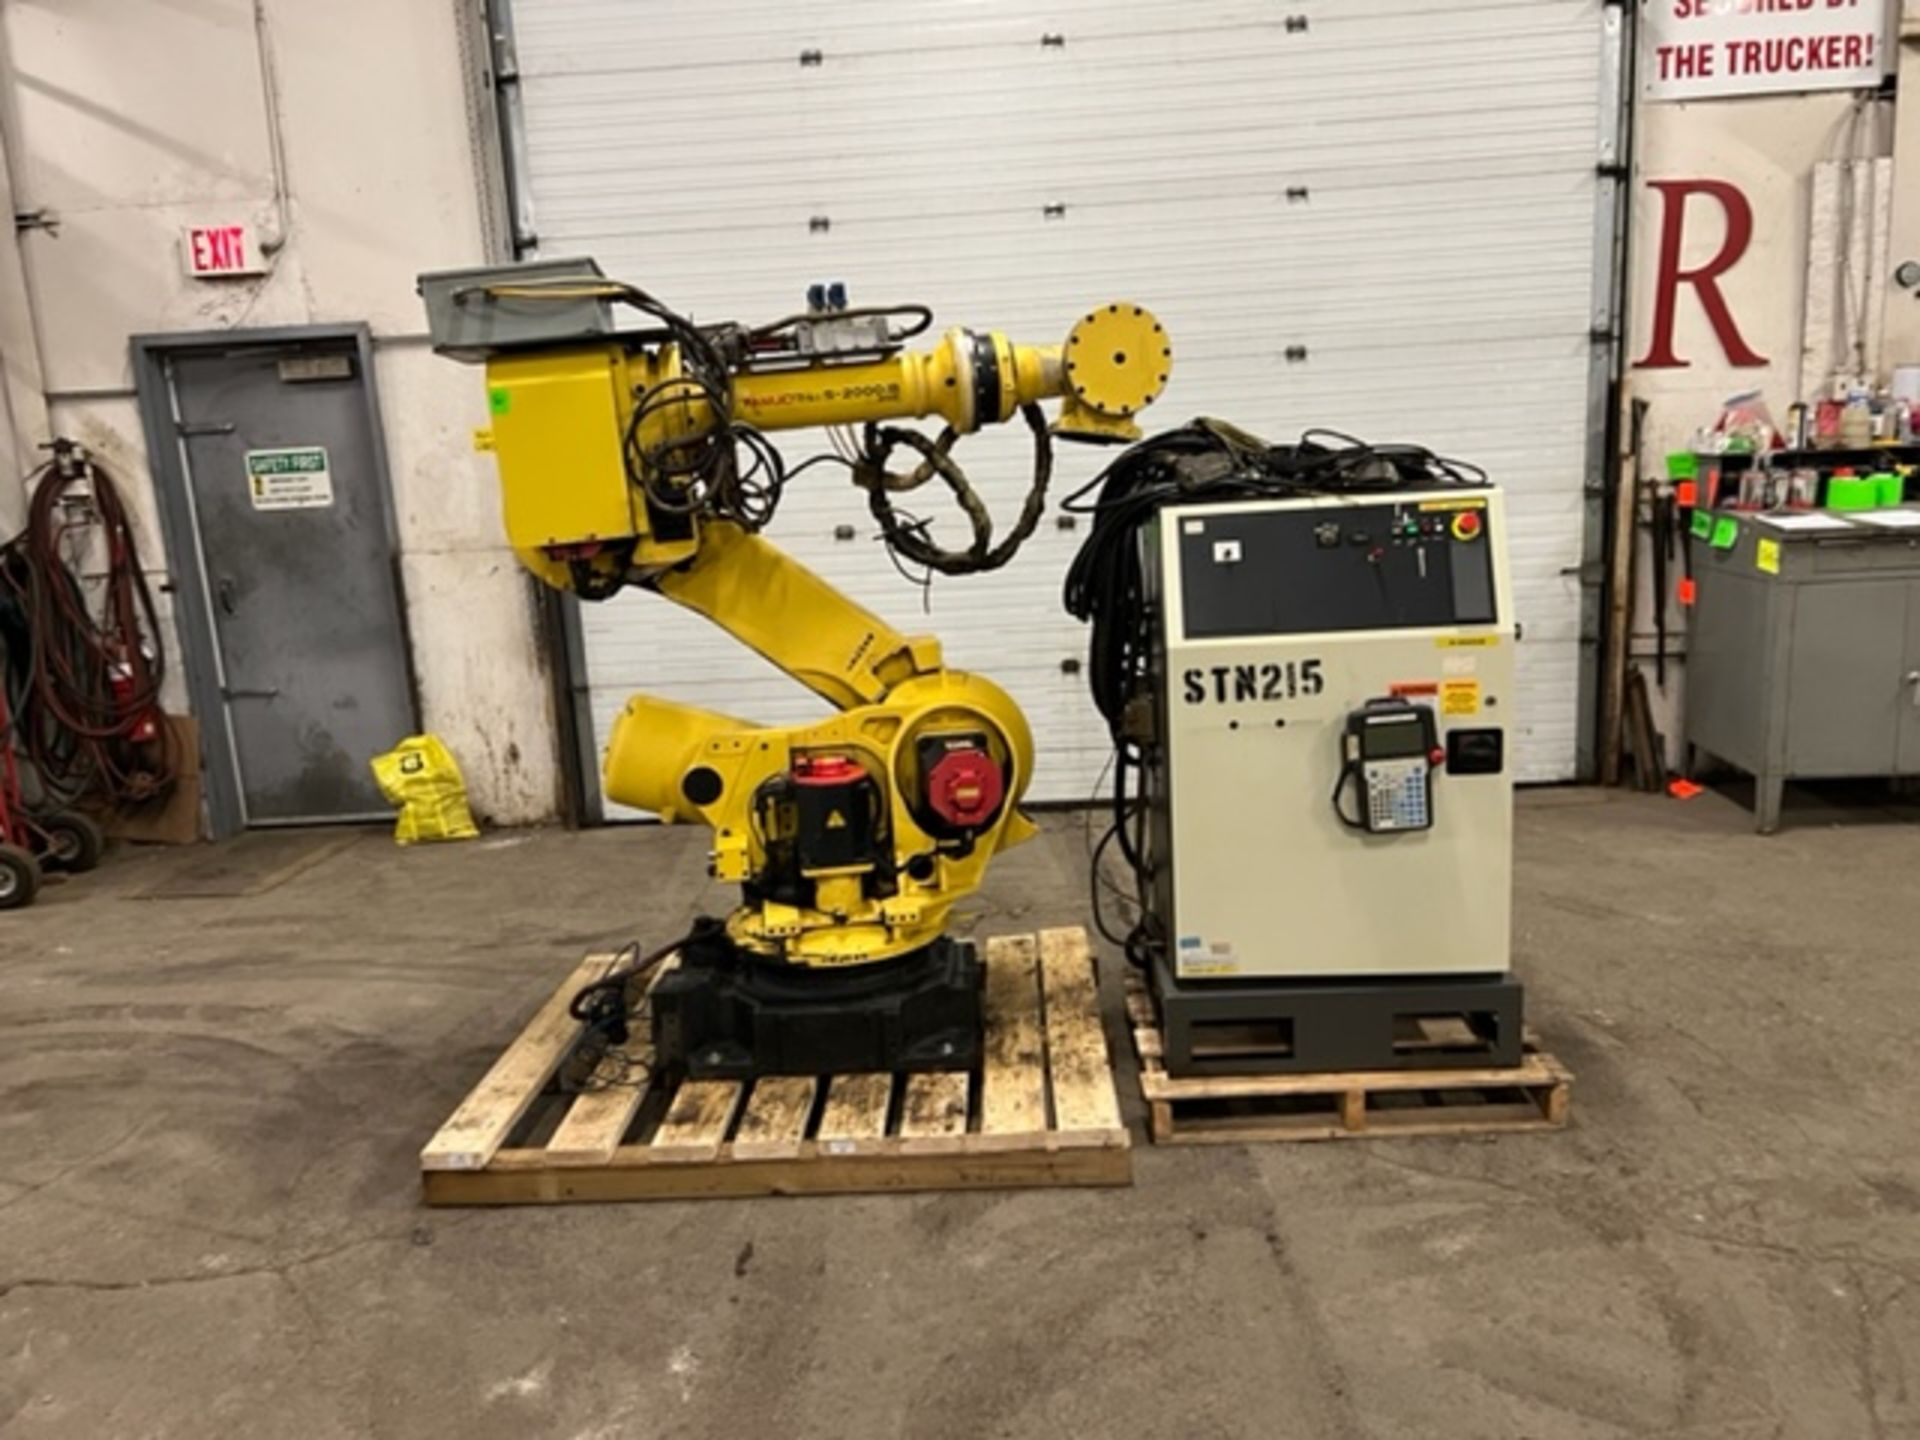 MINT 2012 Fanuc Handling Robot Model R-2000iB 210F - 210kg payload with R-30iA Controller